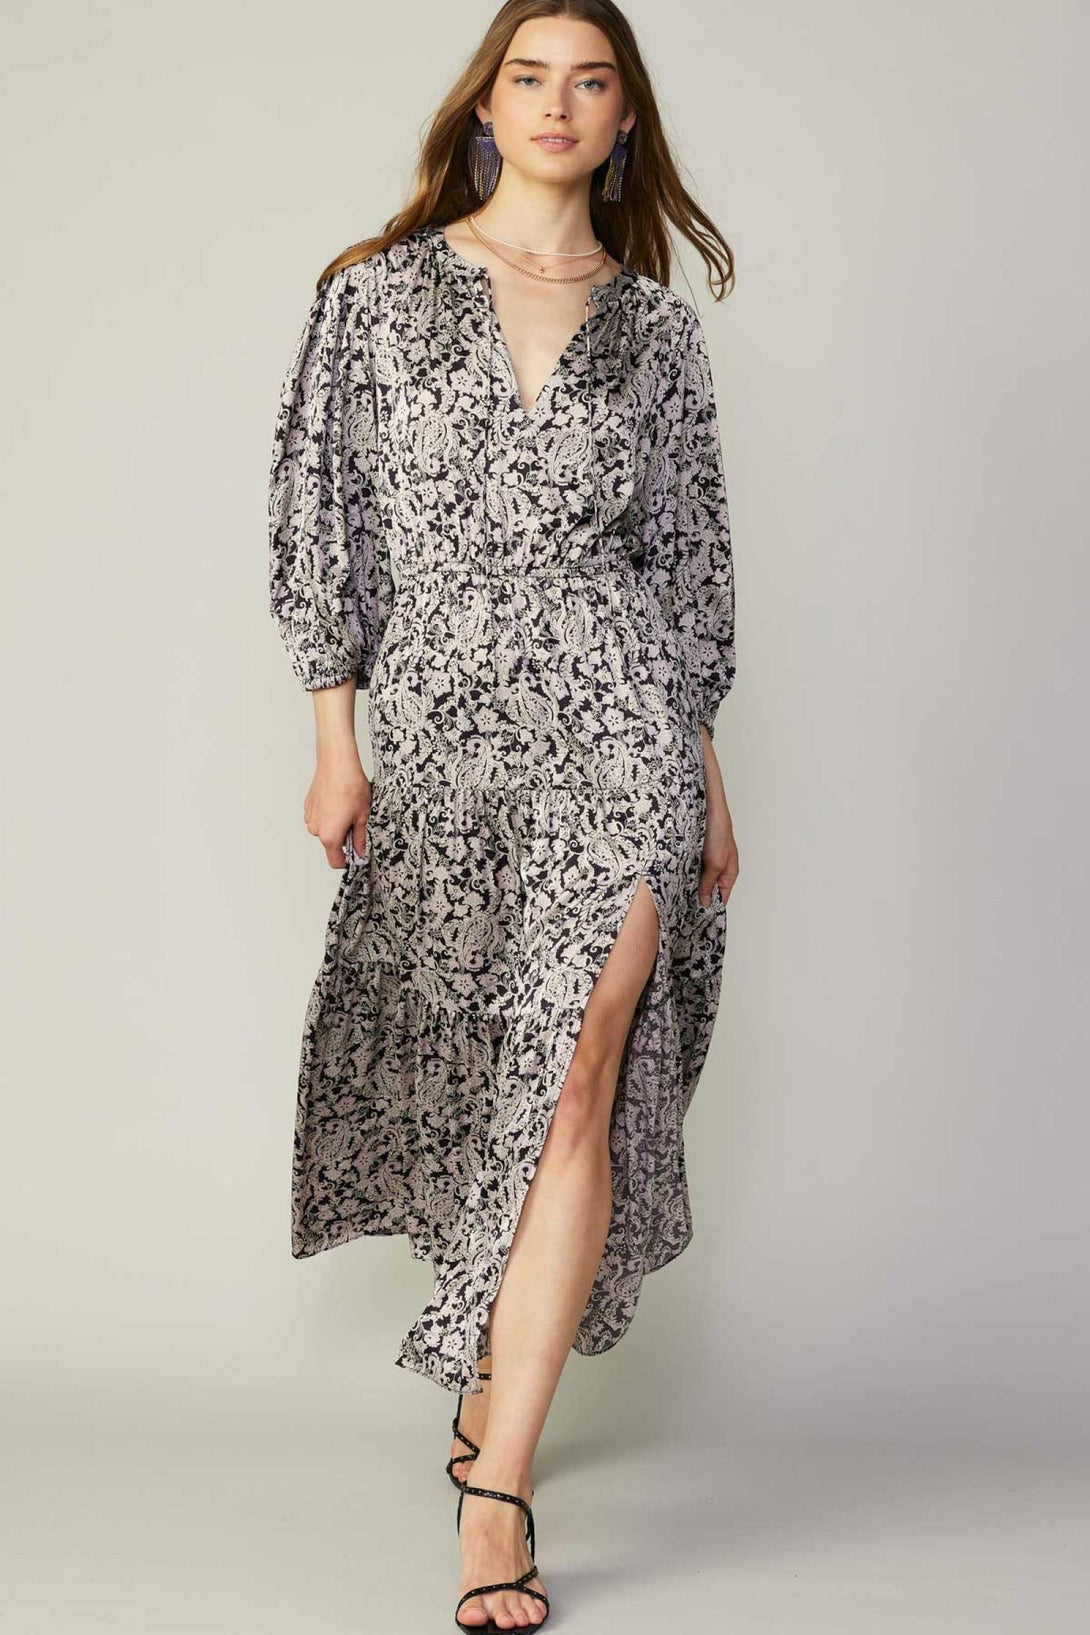 Current Air Long Sleeve Dress With Split Neck